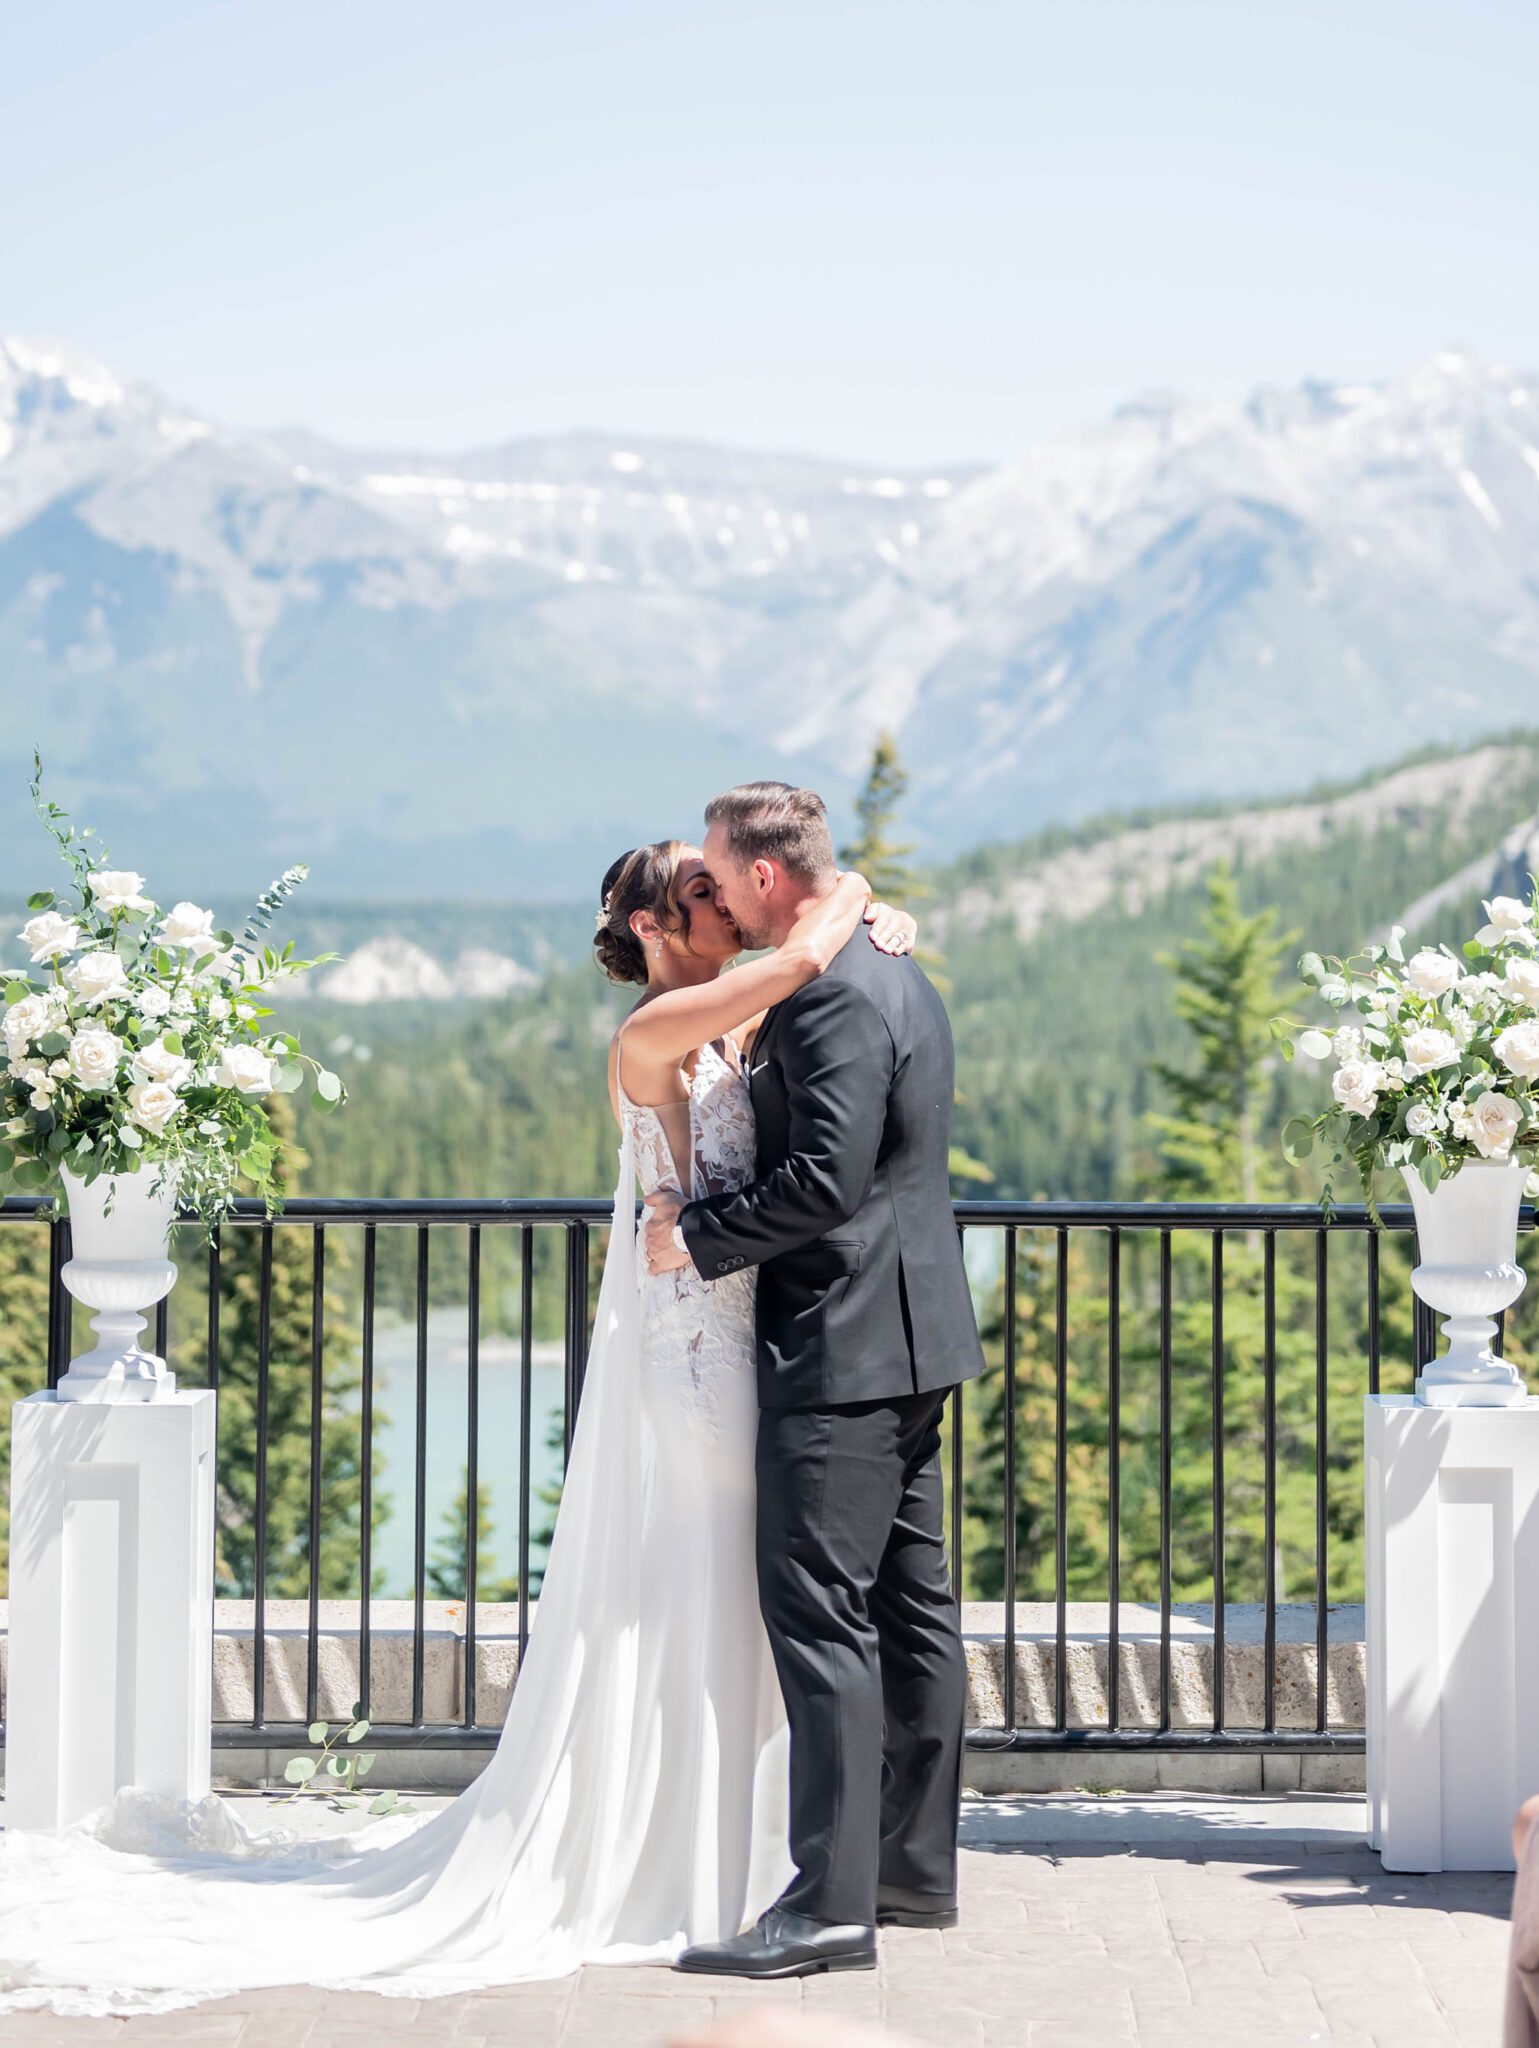 Bride and groom share first kiss at their Banff summer wedding surrounded by pedestals of white florals and greenery, classic wedding style inspiration. 